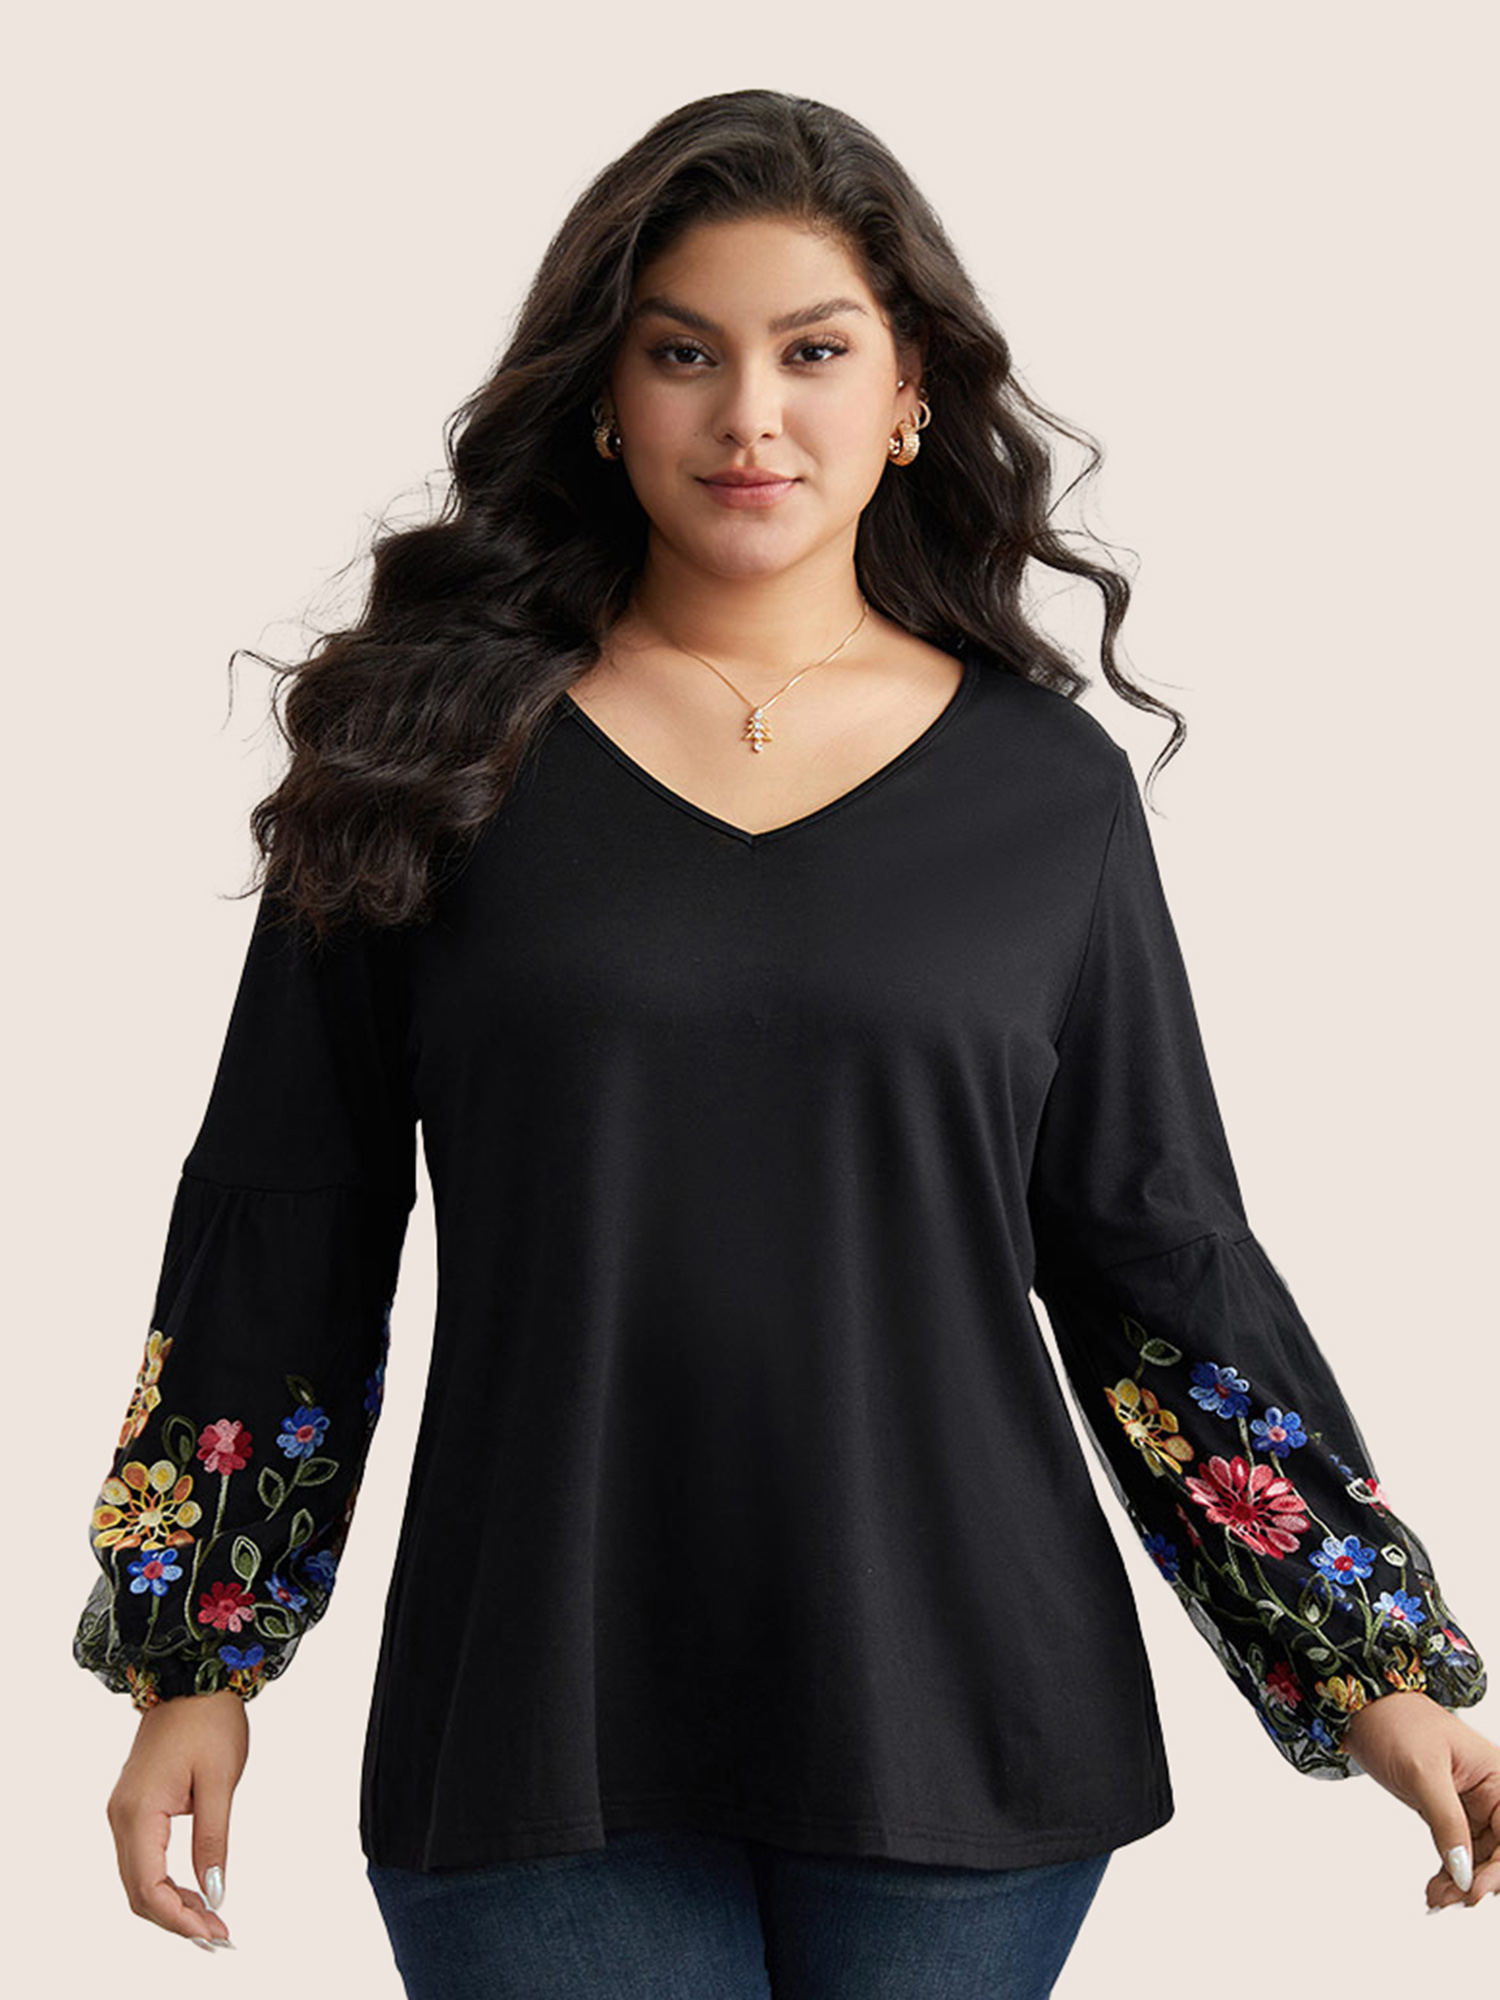 

Plus Size Floral Embroidered Lantern Sleeve T-shirt Black Women Elegant Broderie anglaise Bohemian Print V-neck Everyday T-shirts BloomChic